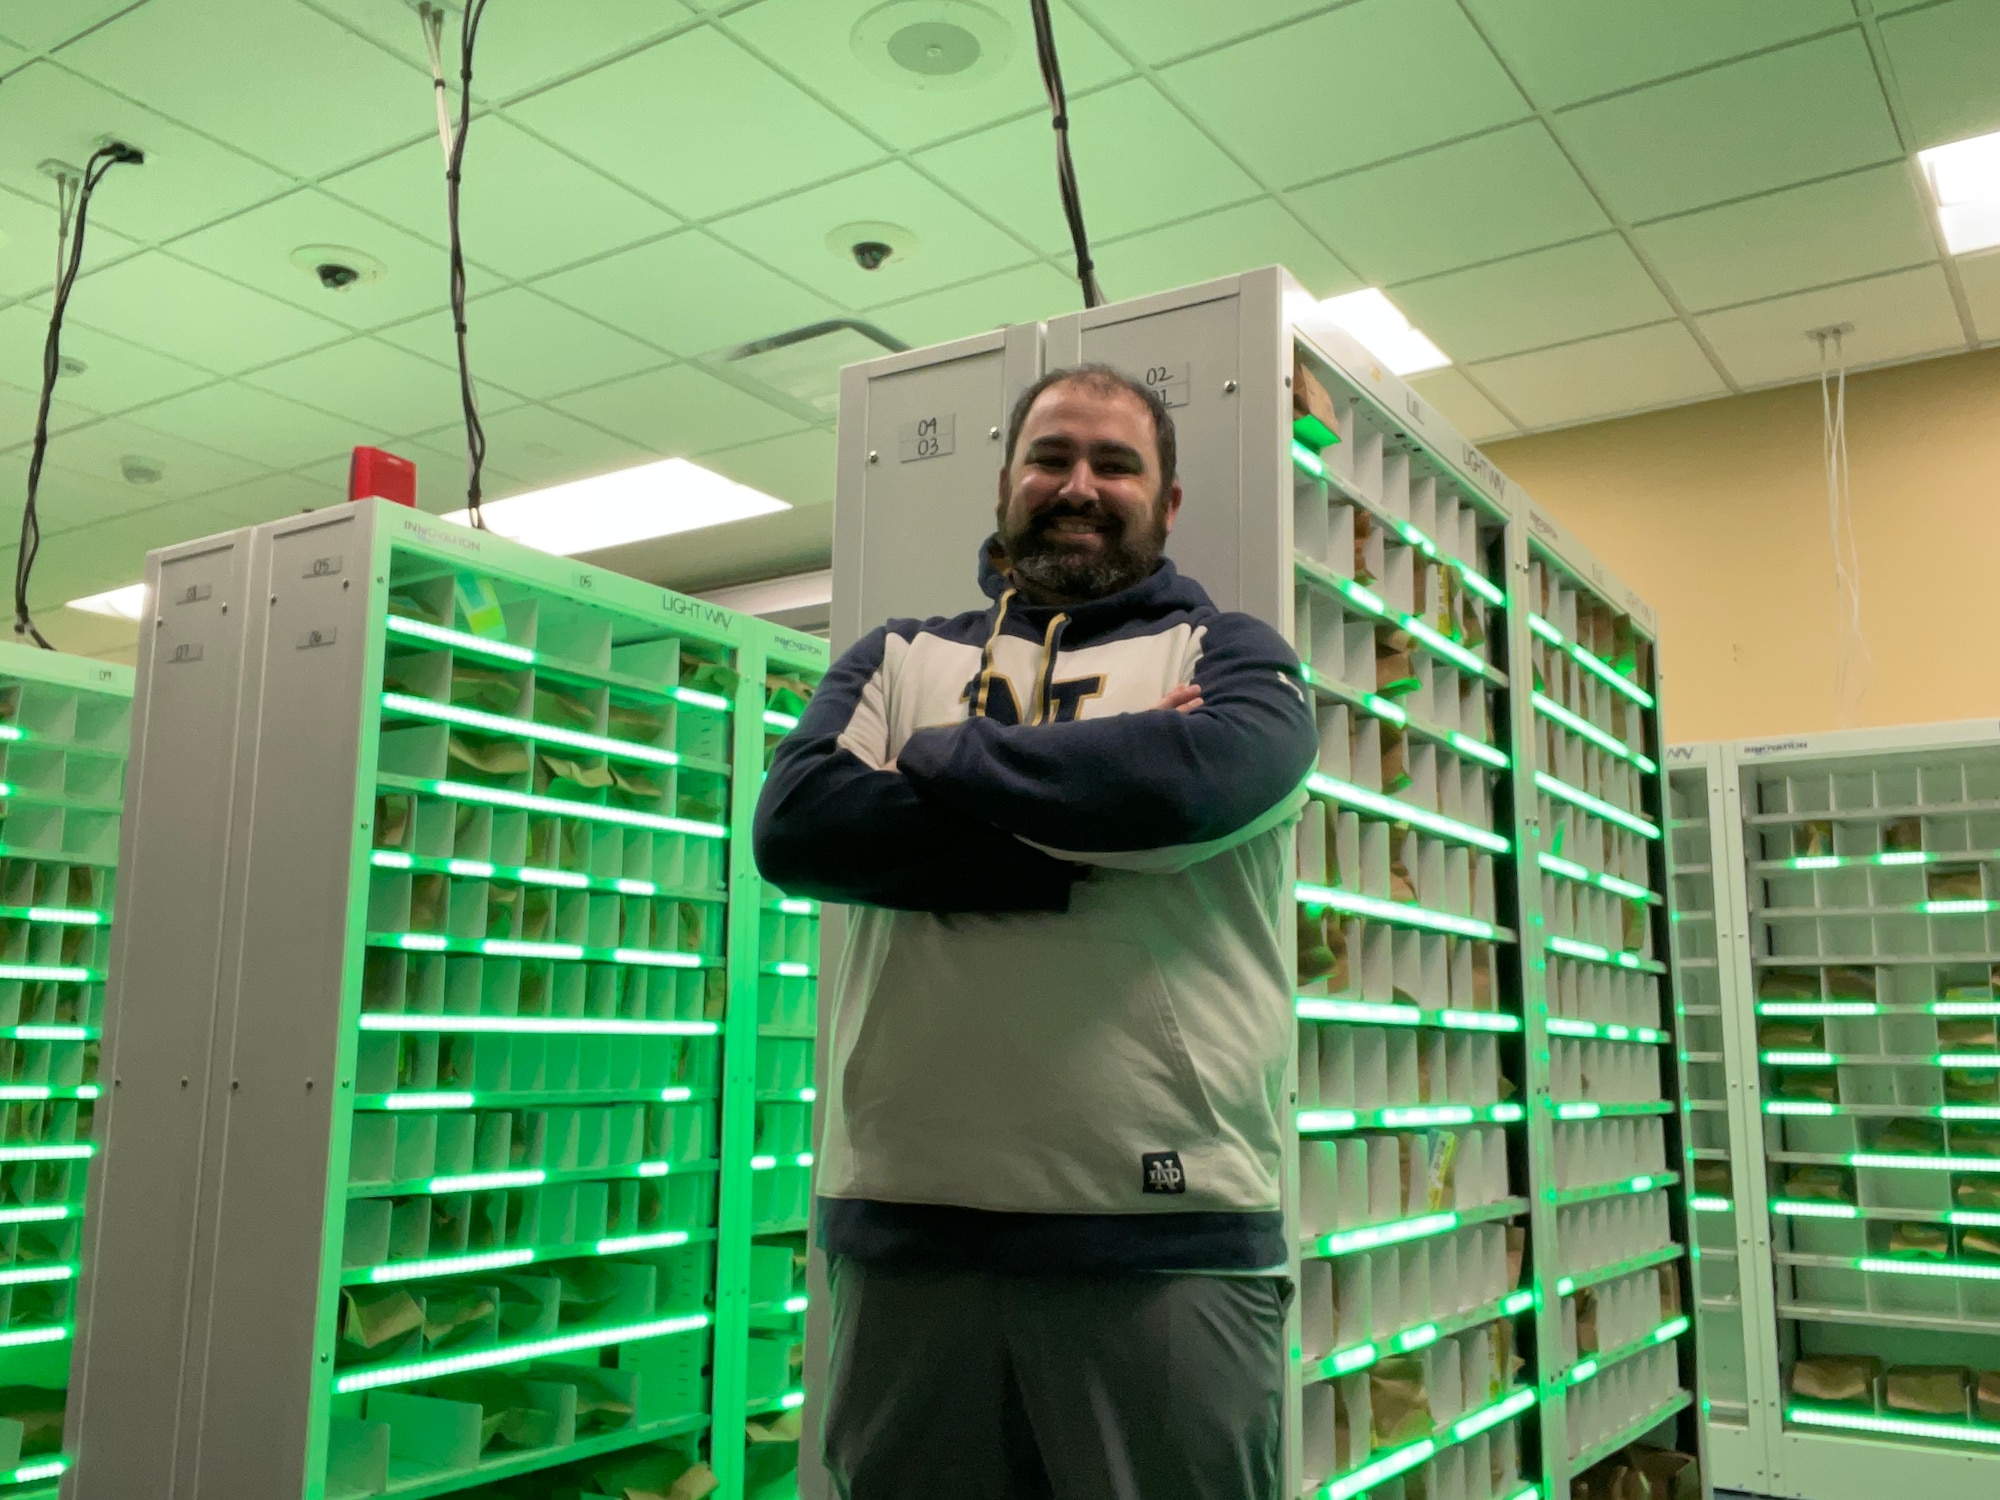 Ryan Porterfield manages Pharmacy Flight systems in three different locations at Wright-Patterson Air Force Base, including 27 lightway dispensing cabinets used in outpatient services. He was selected as the 88th Air Base Wing’s 2020 Civilian Category I of the Year. (Contributed photo)